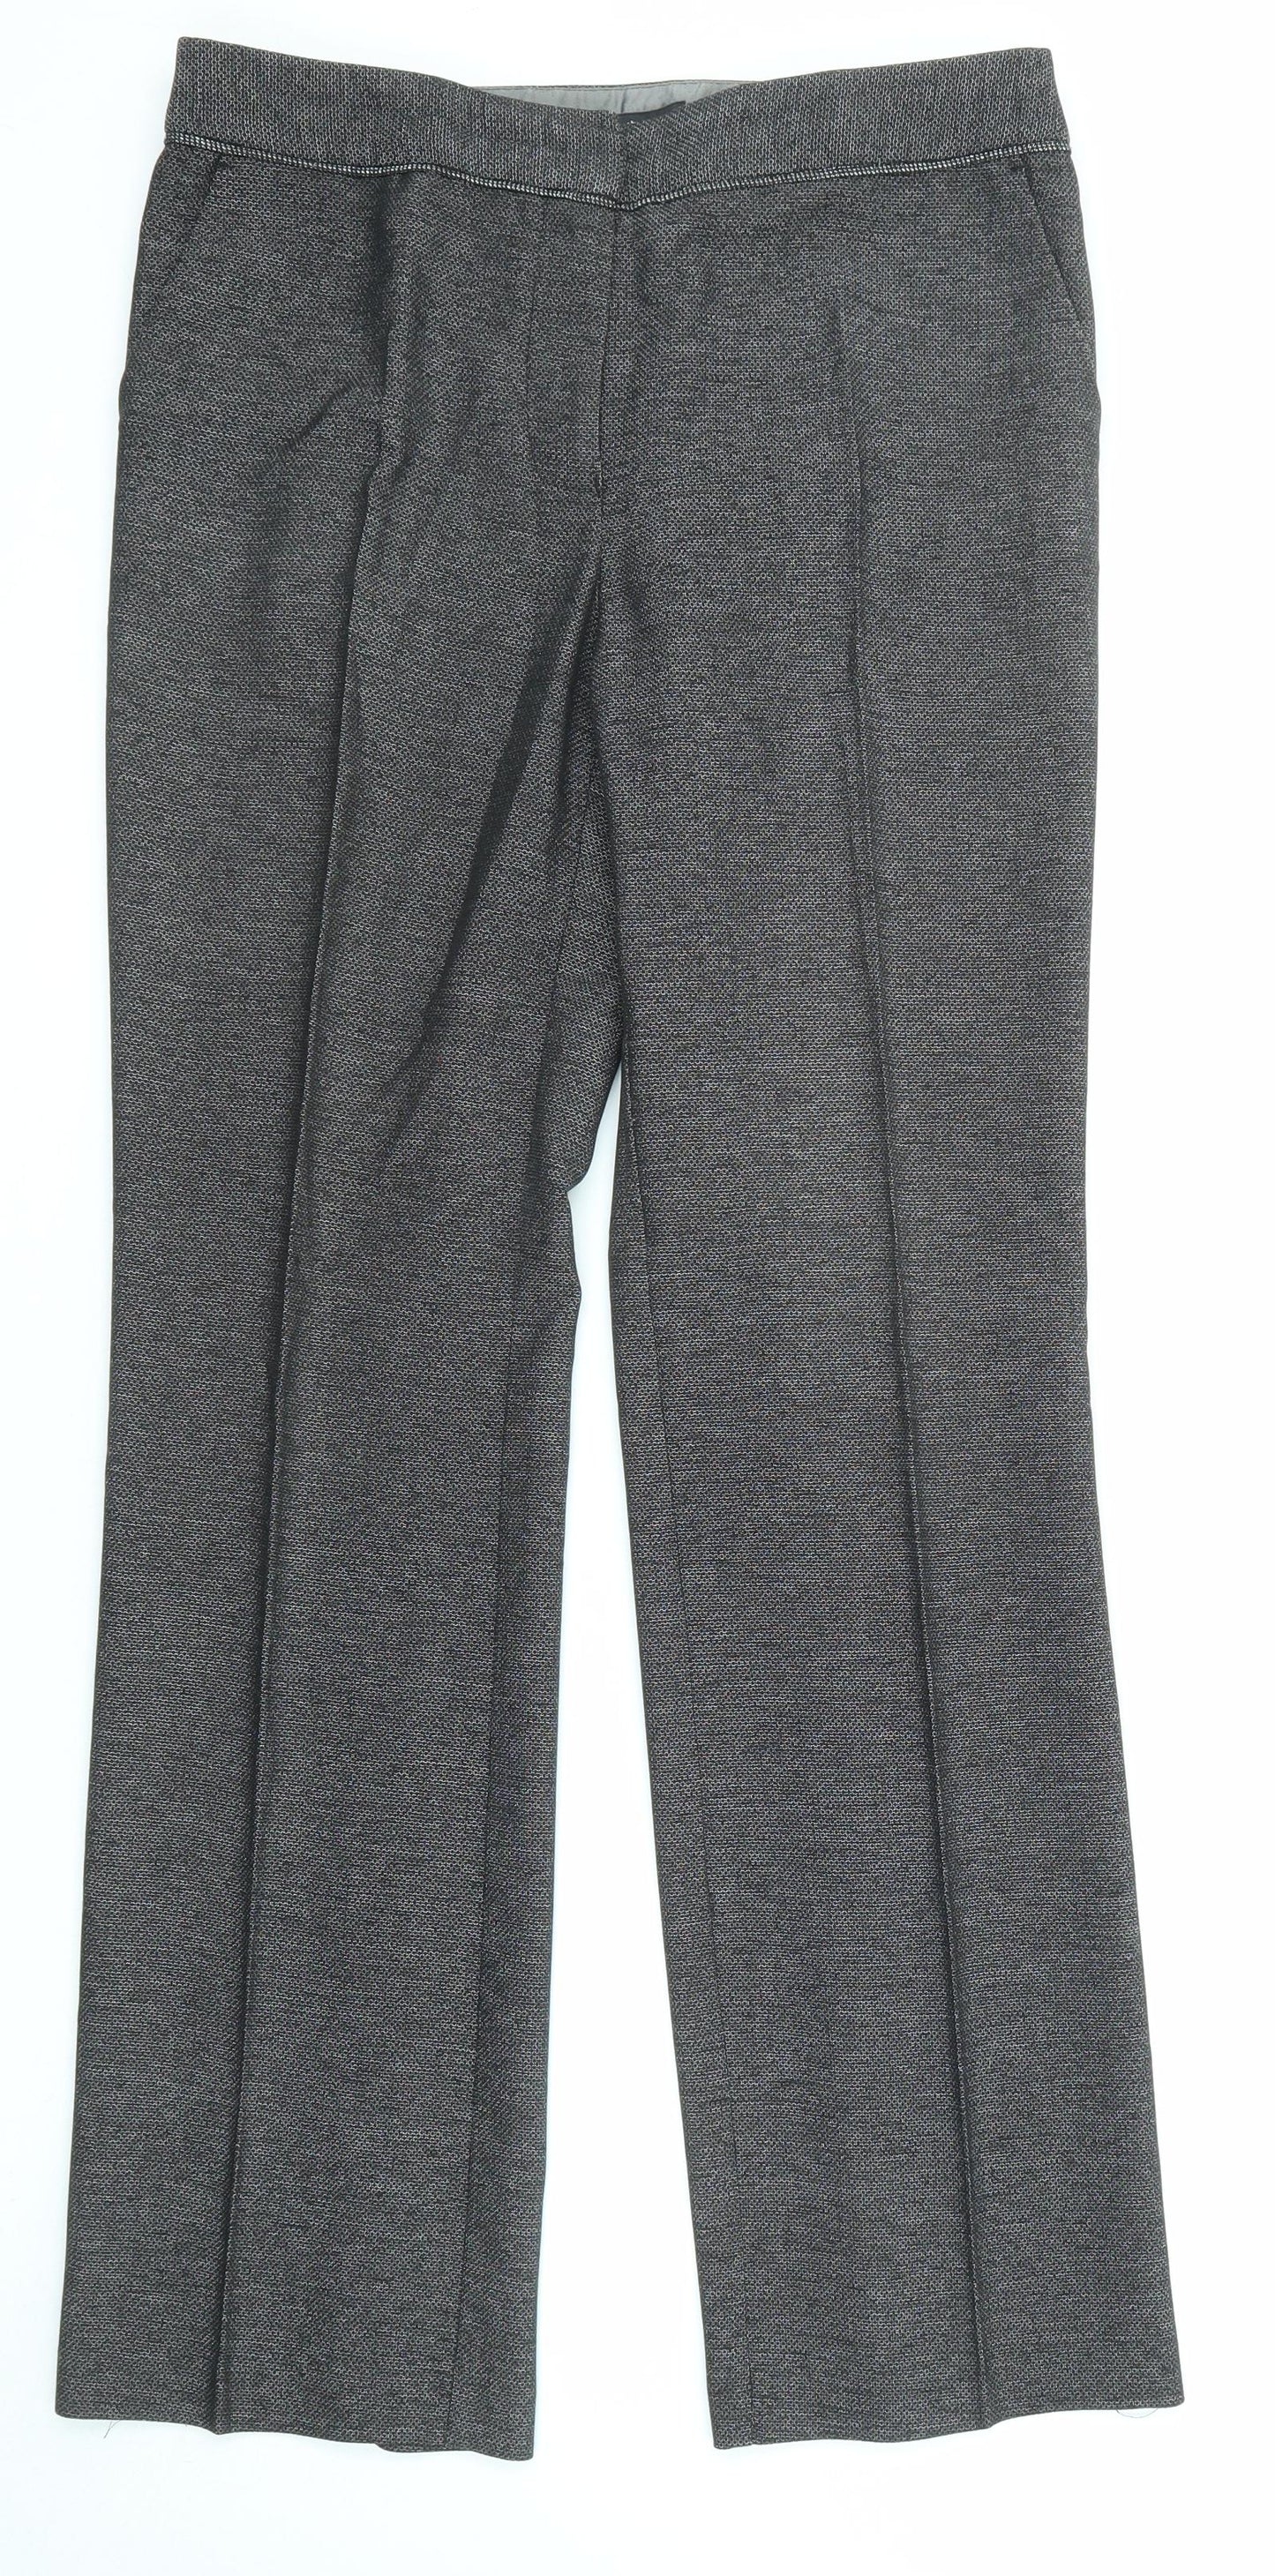 NEXT Womens Grey Polyester Dress Pants Trousers Size 10 L32 in Regular Zip